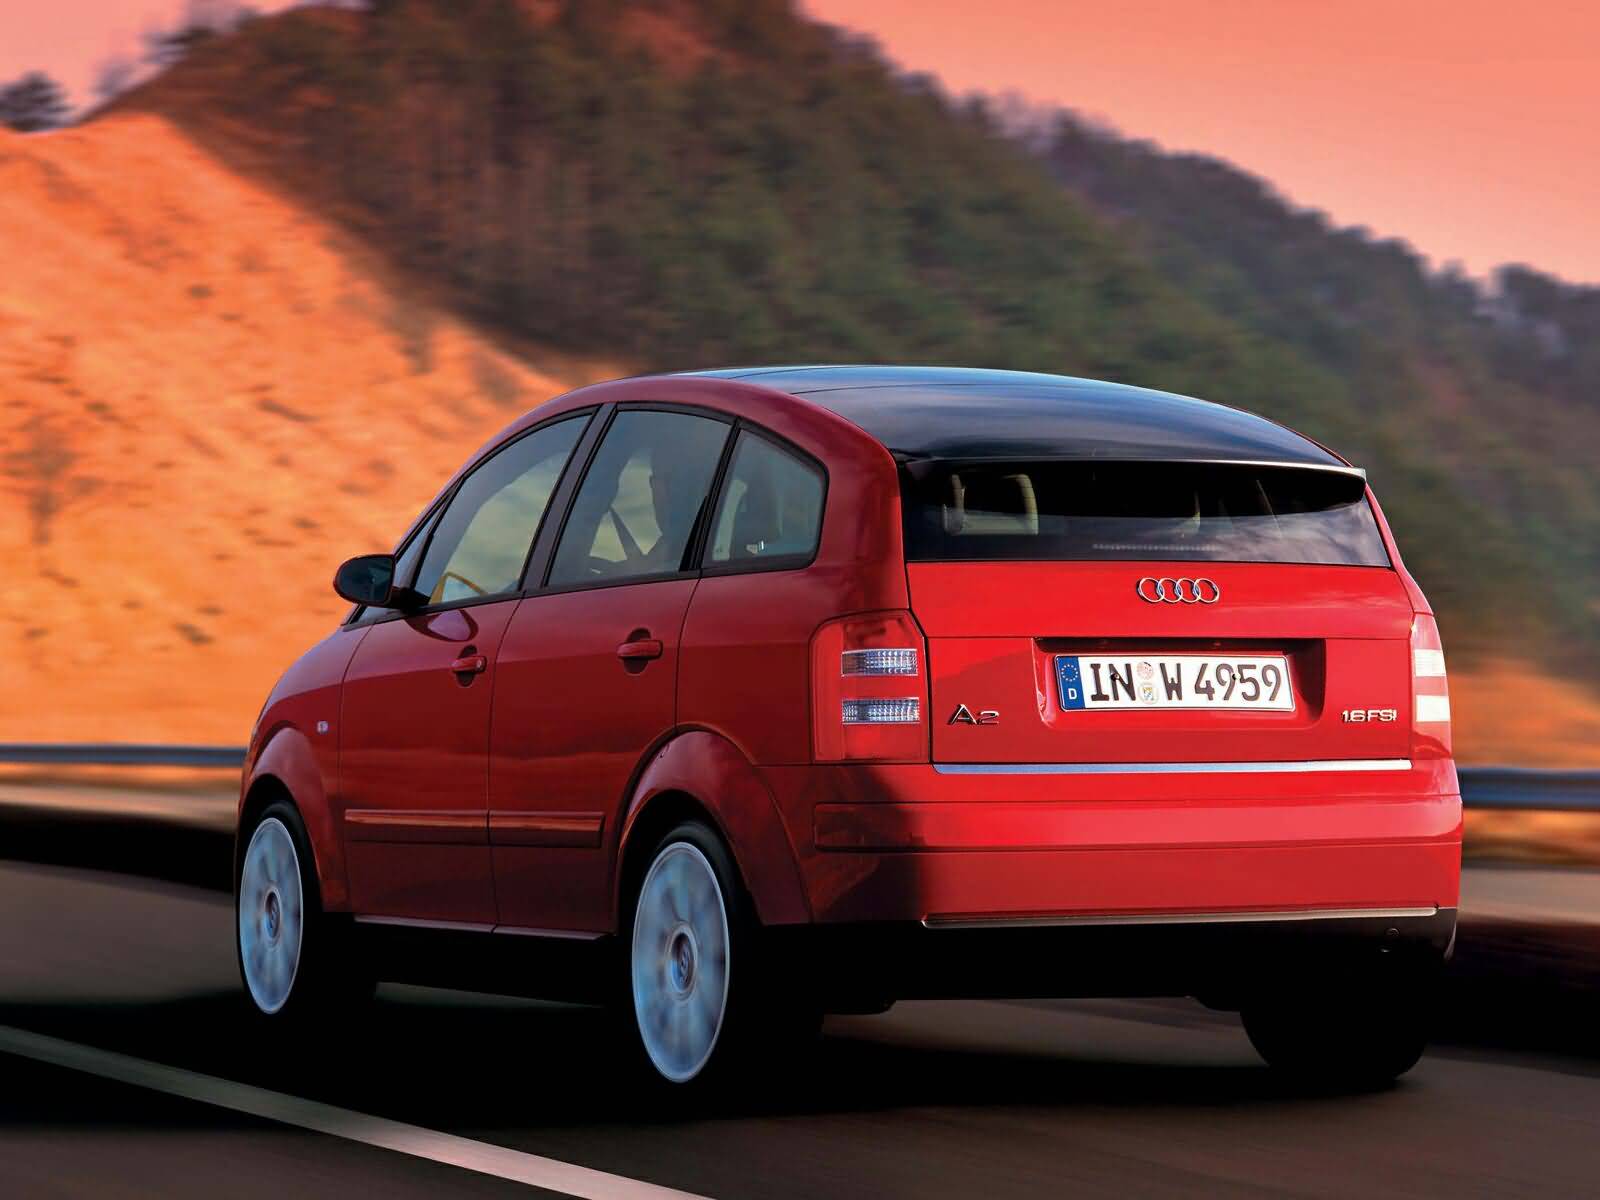 Audi A2 Concept Wallpapers